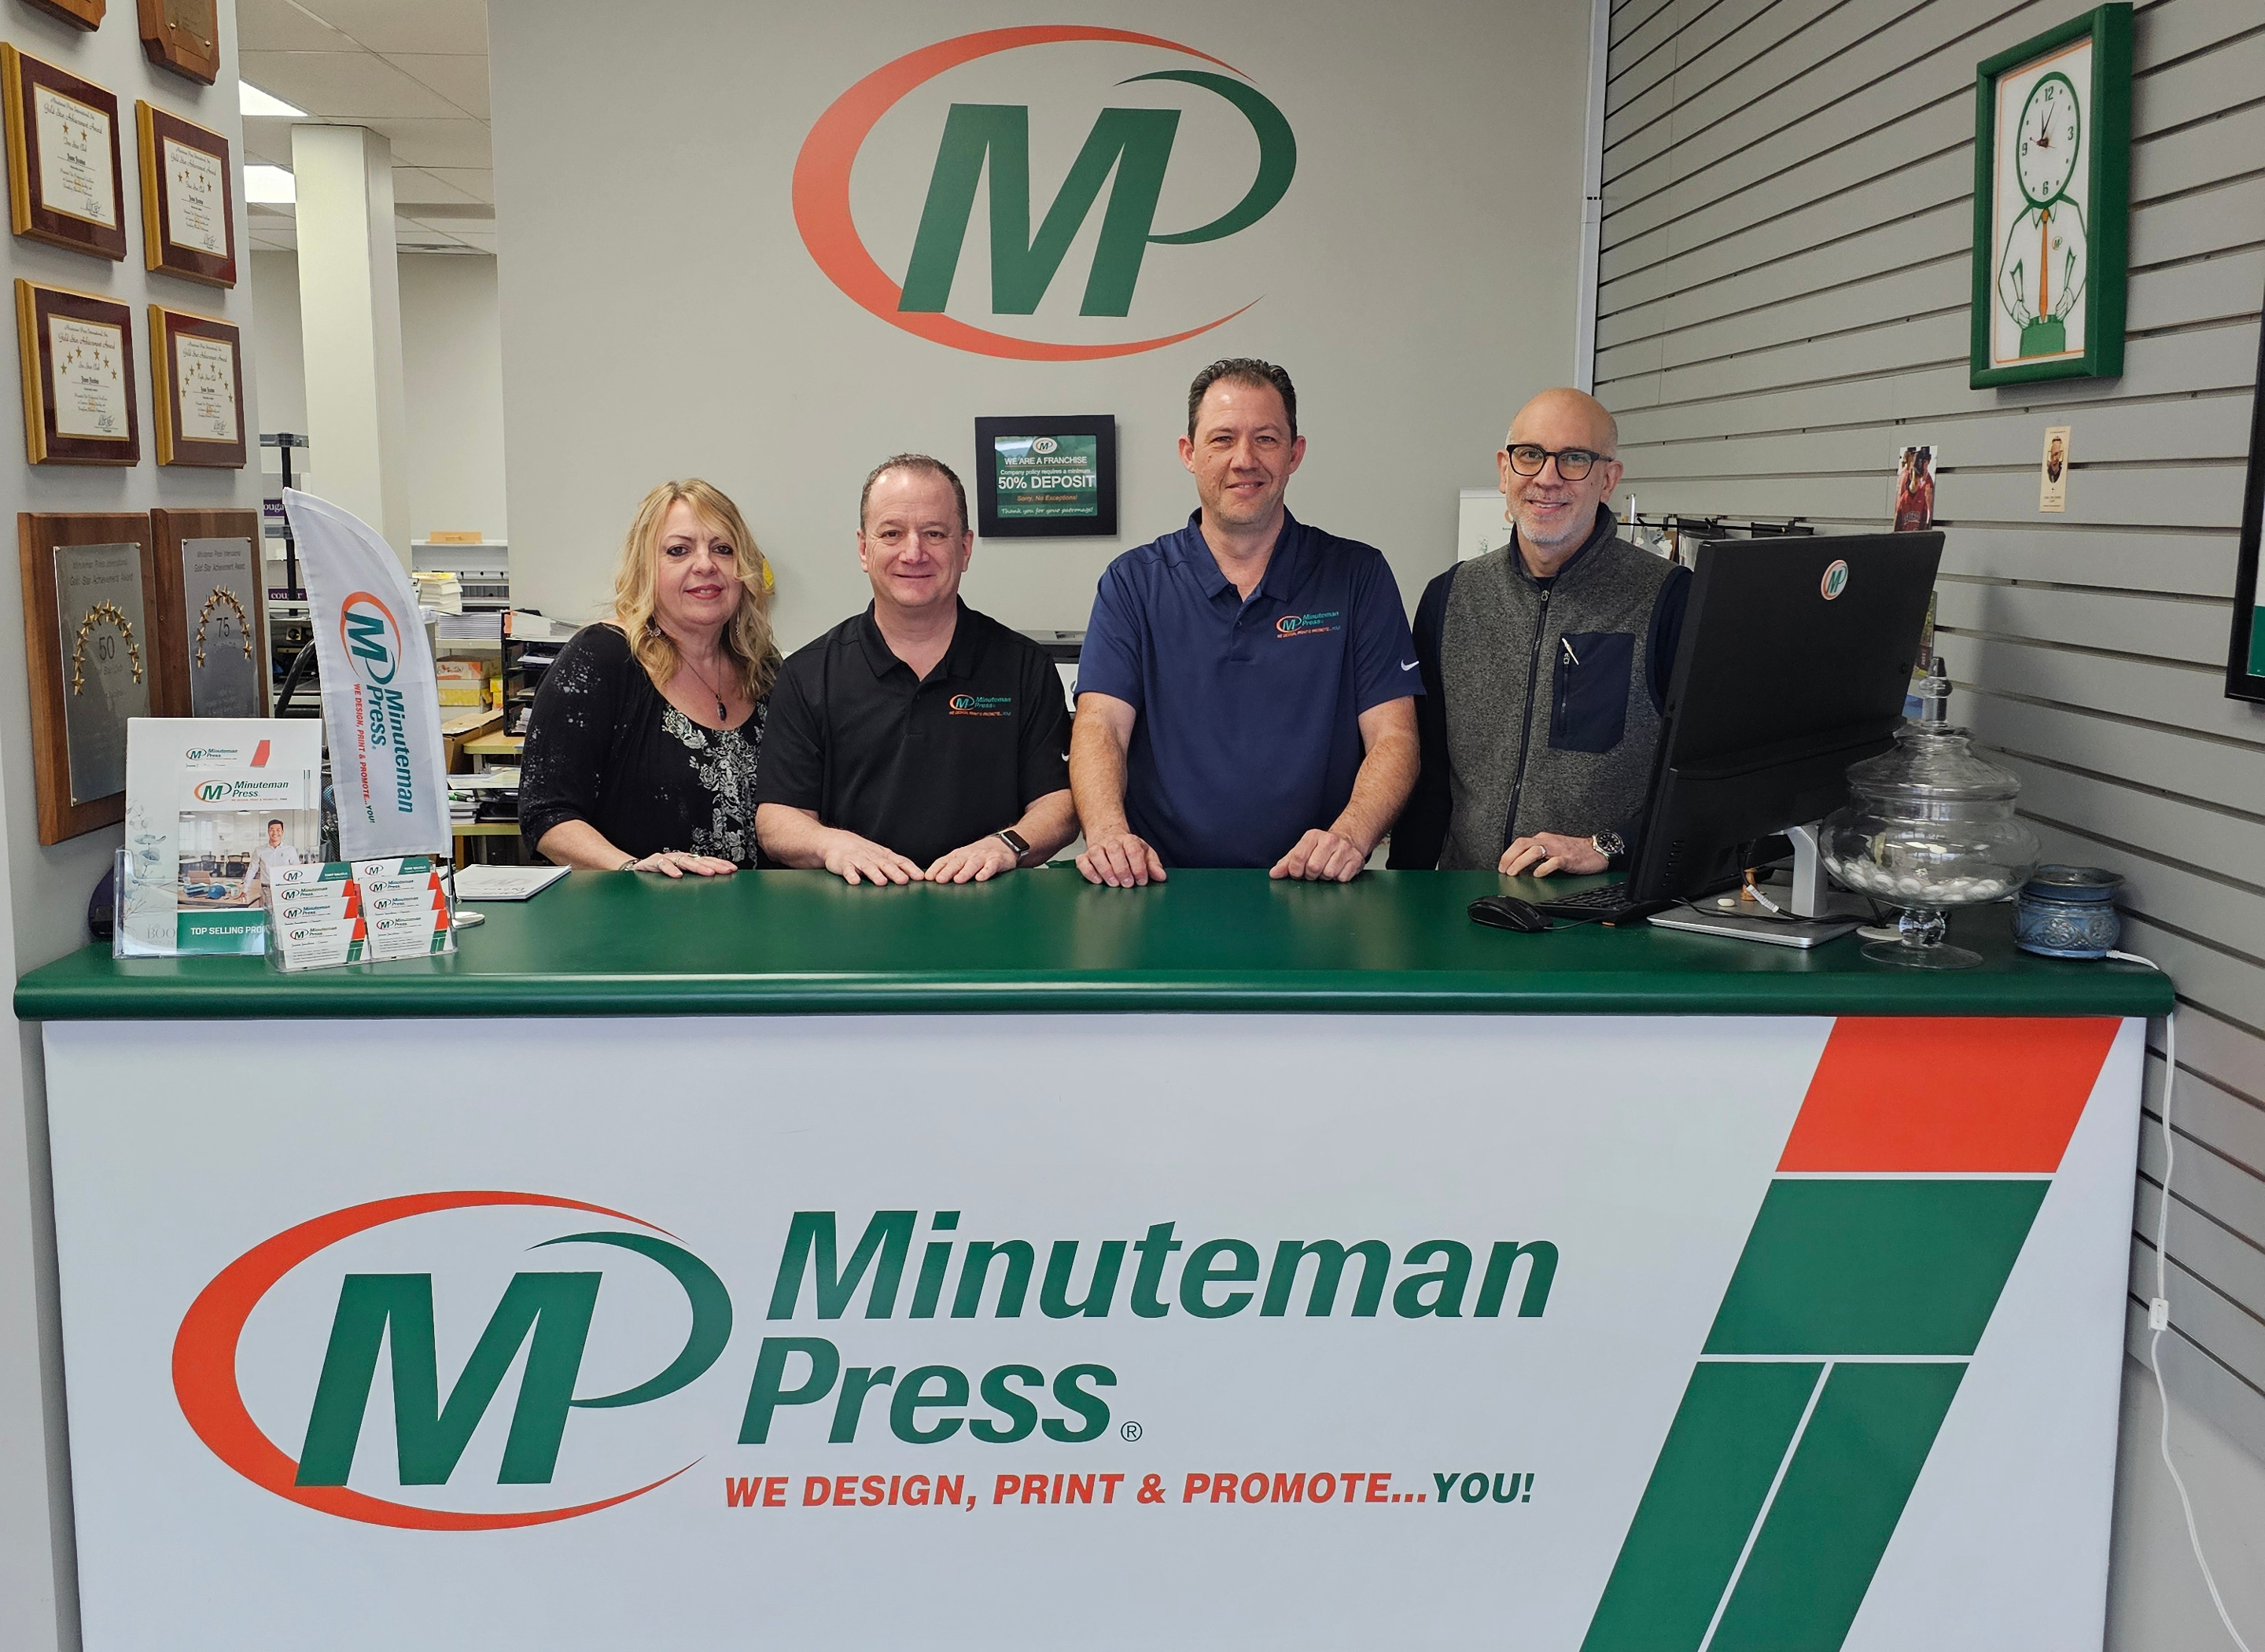 Minuteman Press in Flemington, NJ has merged with Printech. Pictured L-R: Kathy Kilgore, Joe Mastrull (Owner, Printech), Jason Jacobus (Owner, Minuteman Press Flemington), and Tony Saliola. Moving forward, the combined company will operate as Minuteman Press. https://sellyourprintingbusiness.com